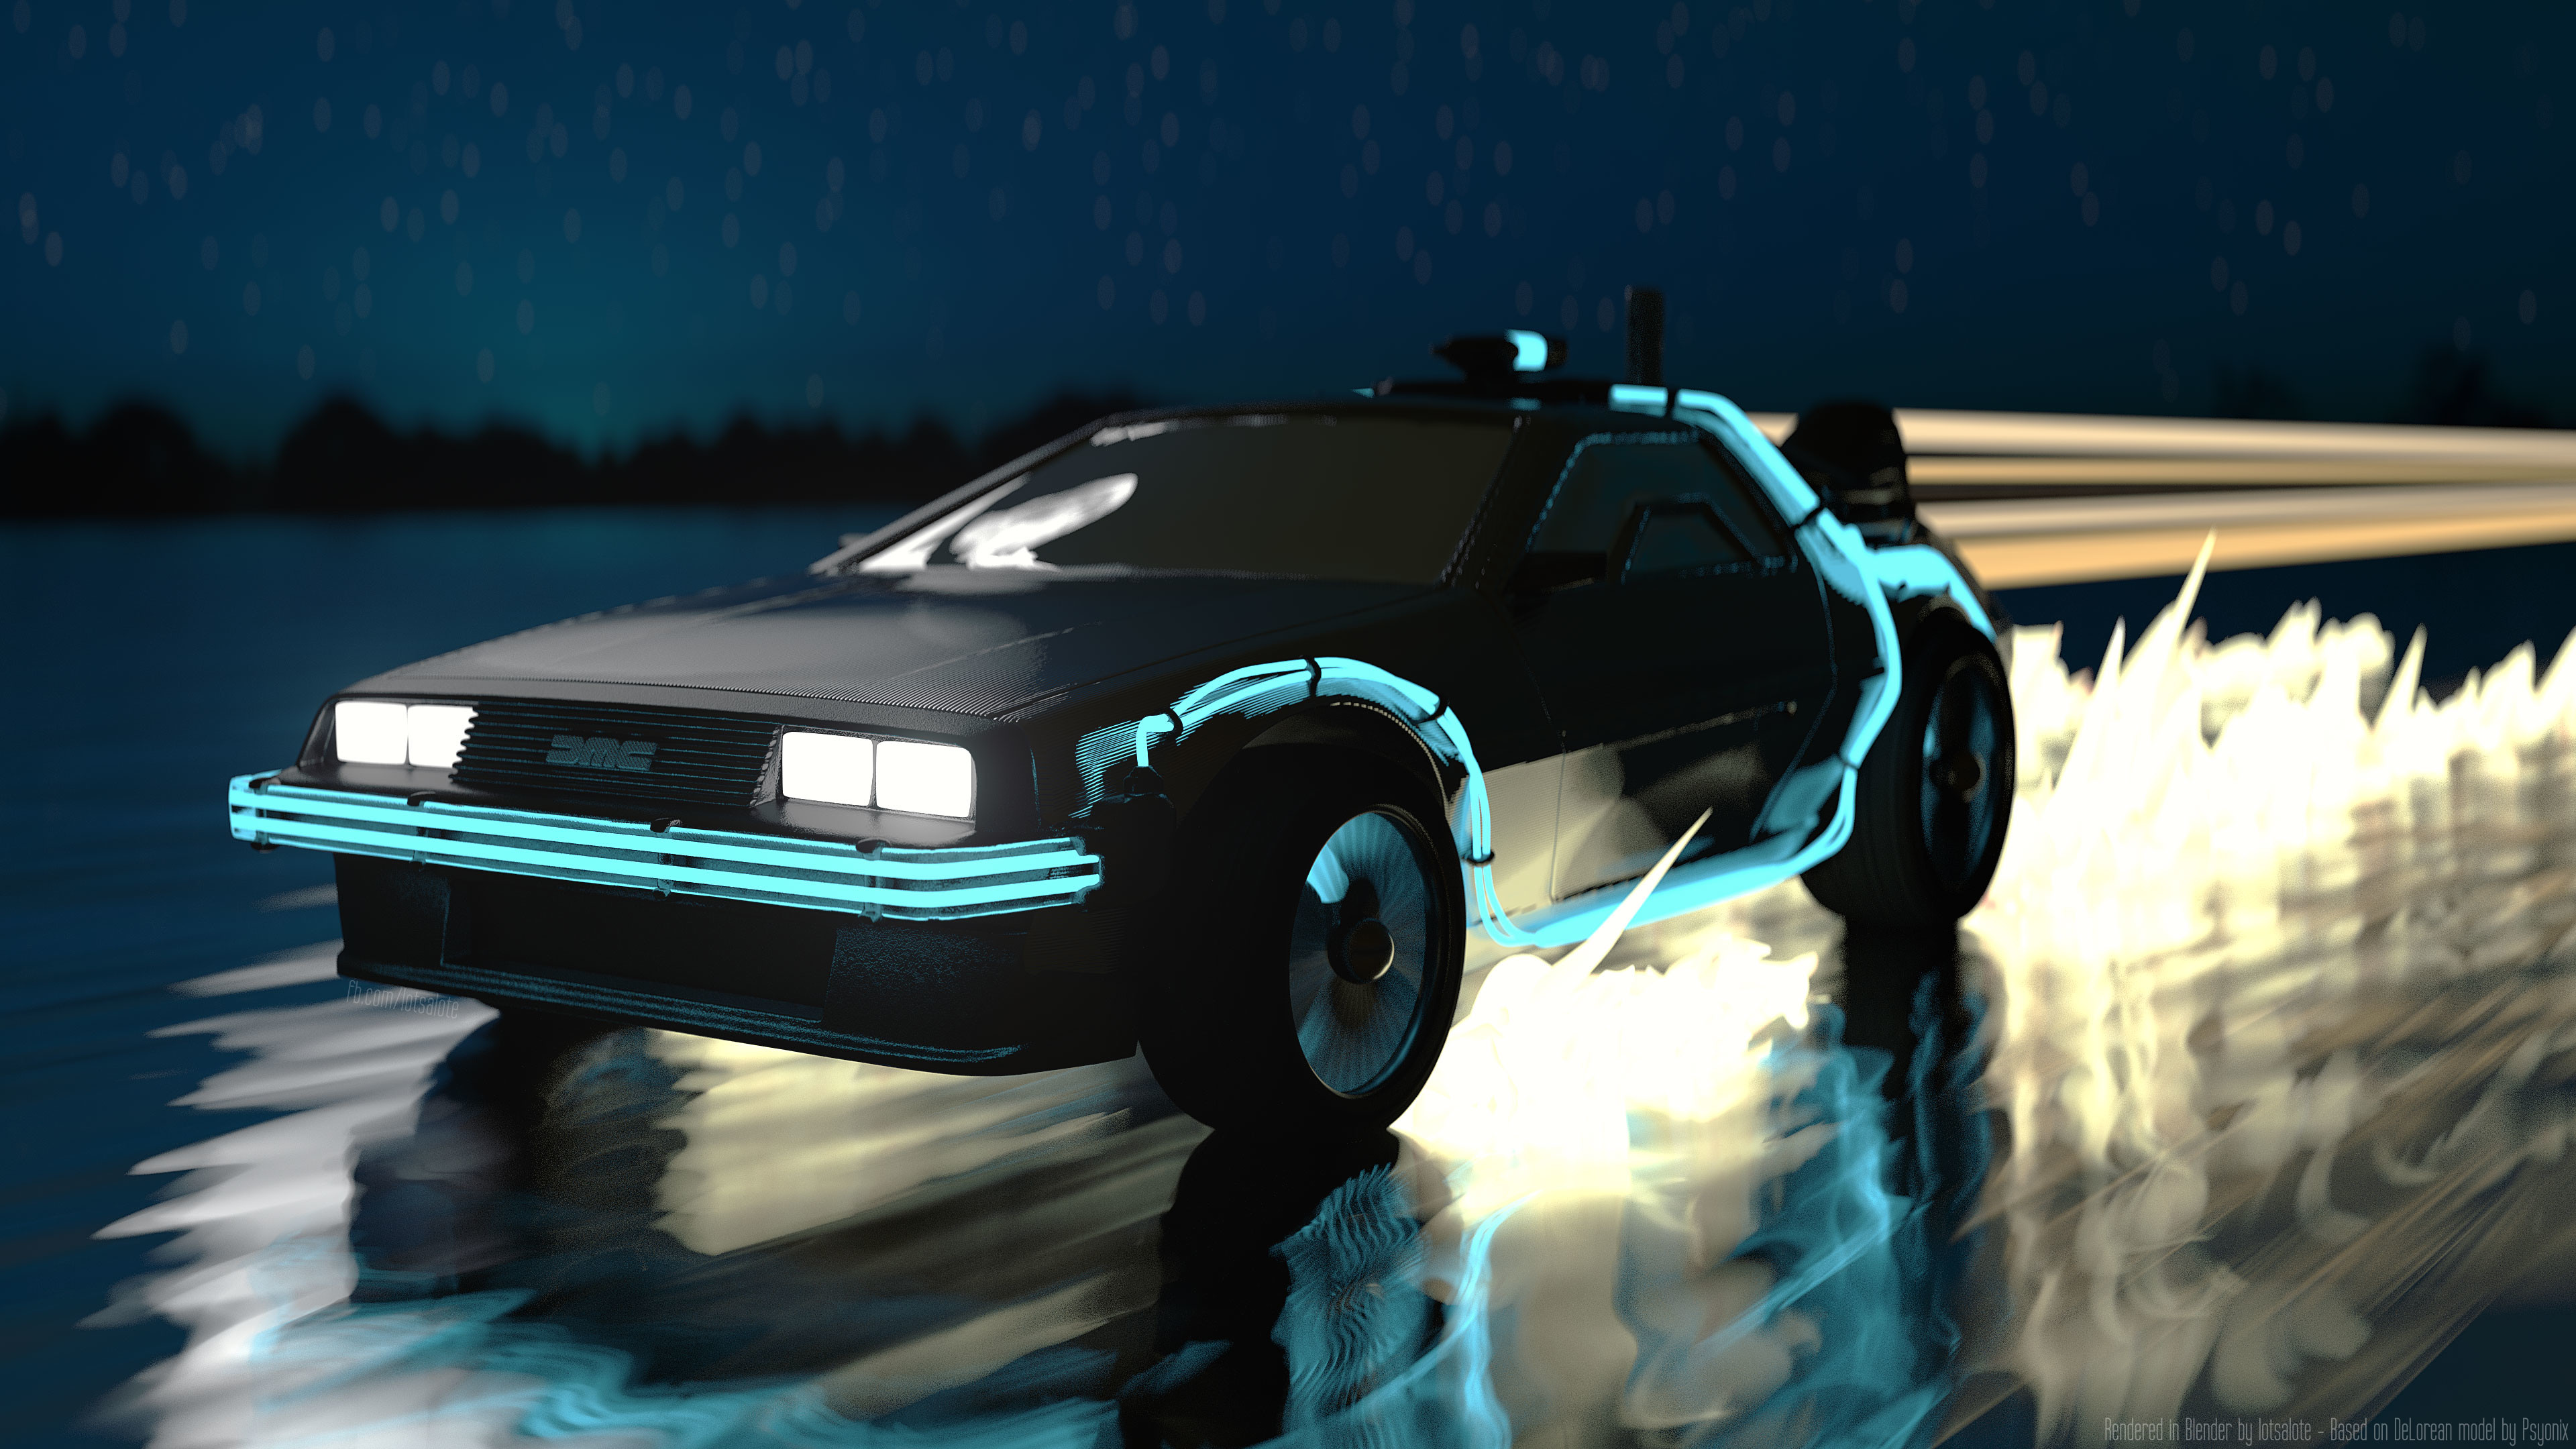 3840x2160 IMAGE/GIFI used the DeLorean model to make this 4K wallpaper. Hope you like  it!